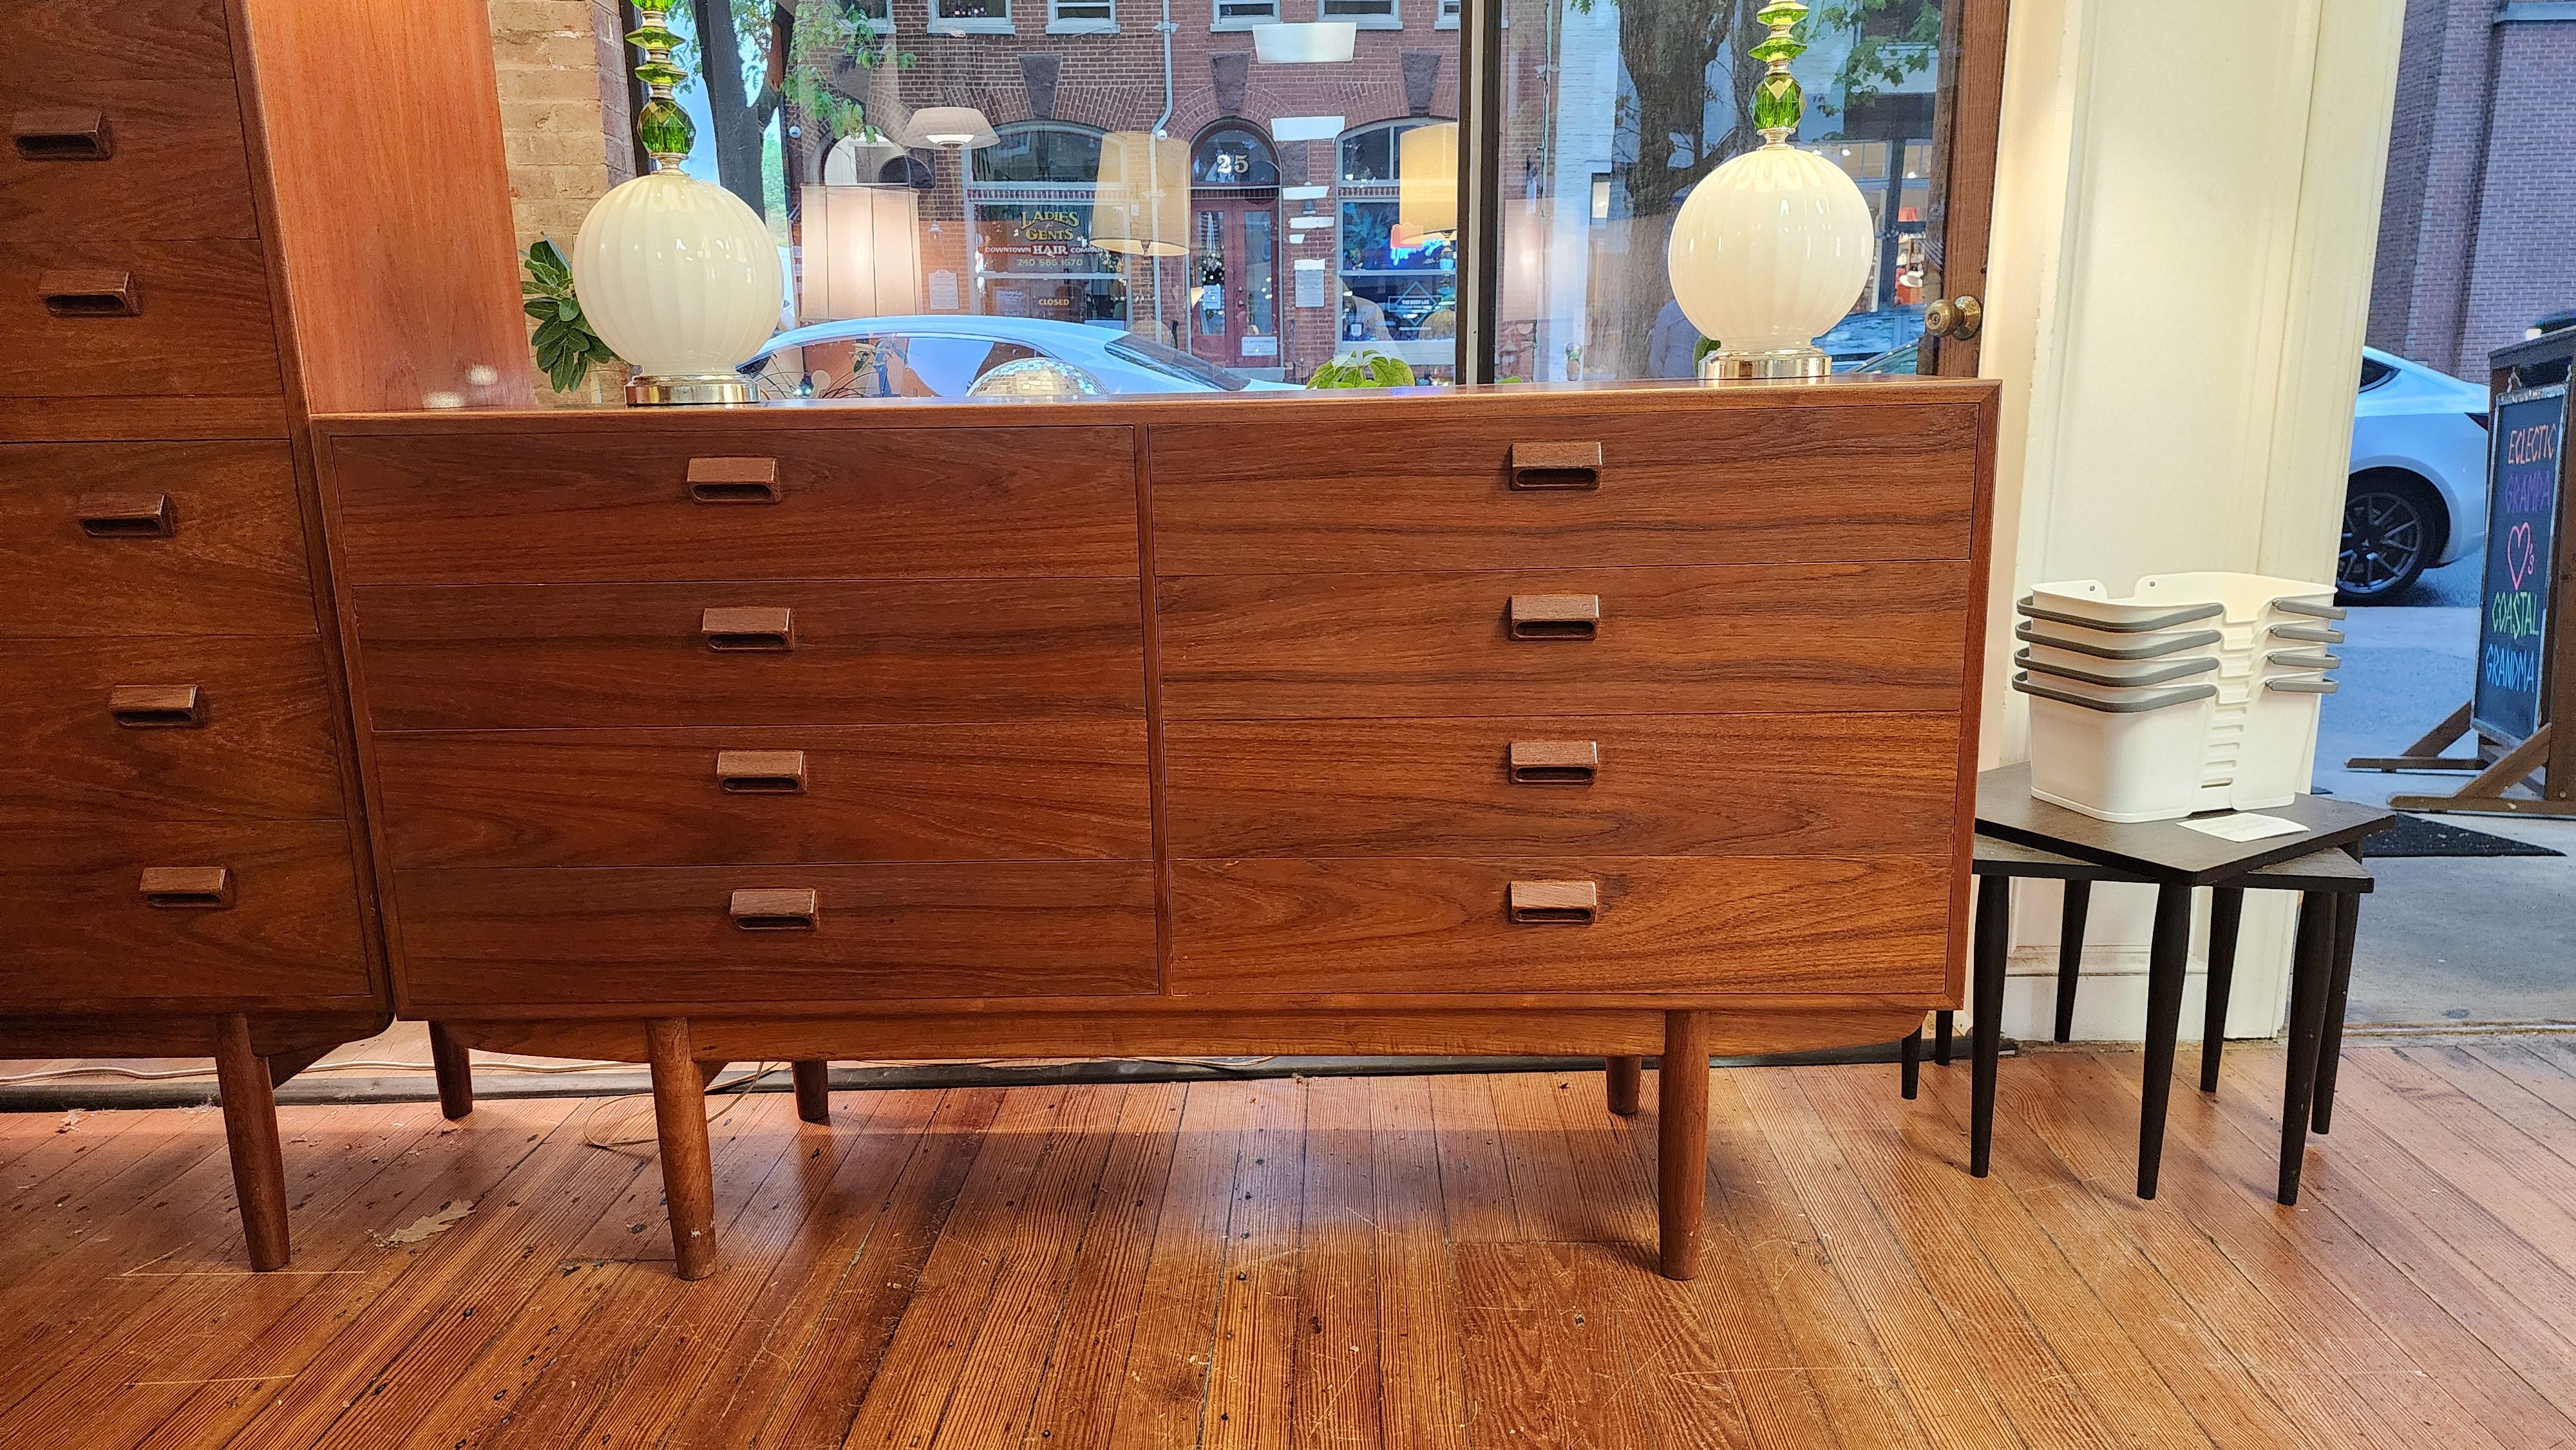 Borge Mogensen is considered the father of Danish modern design and this dresser is one of his most well known case good pieces. This six-drawer dresser has been in the same family since it was originally purchased in the 1960s. The matching tall